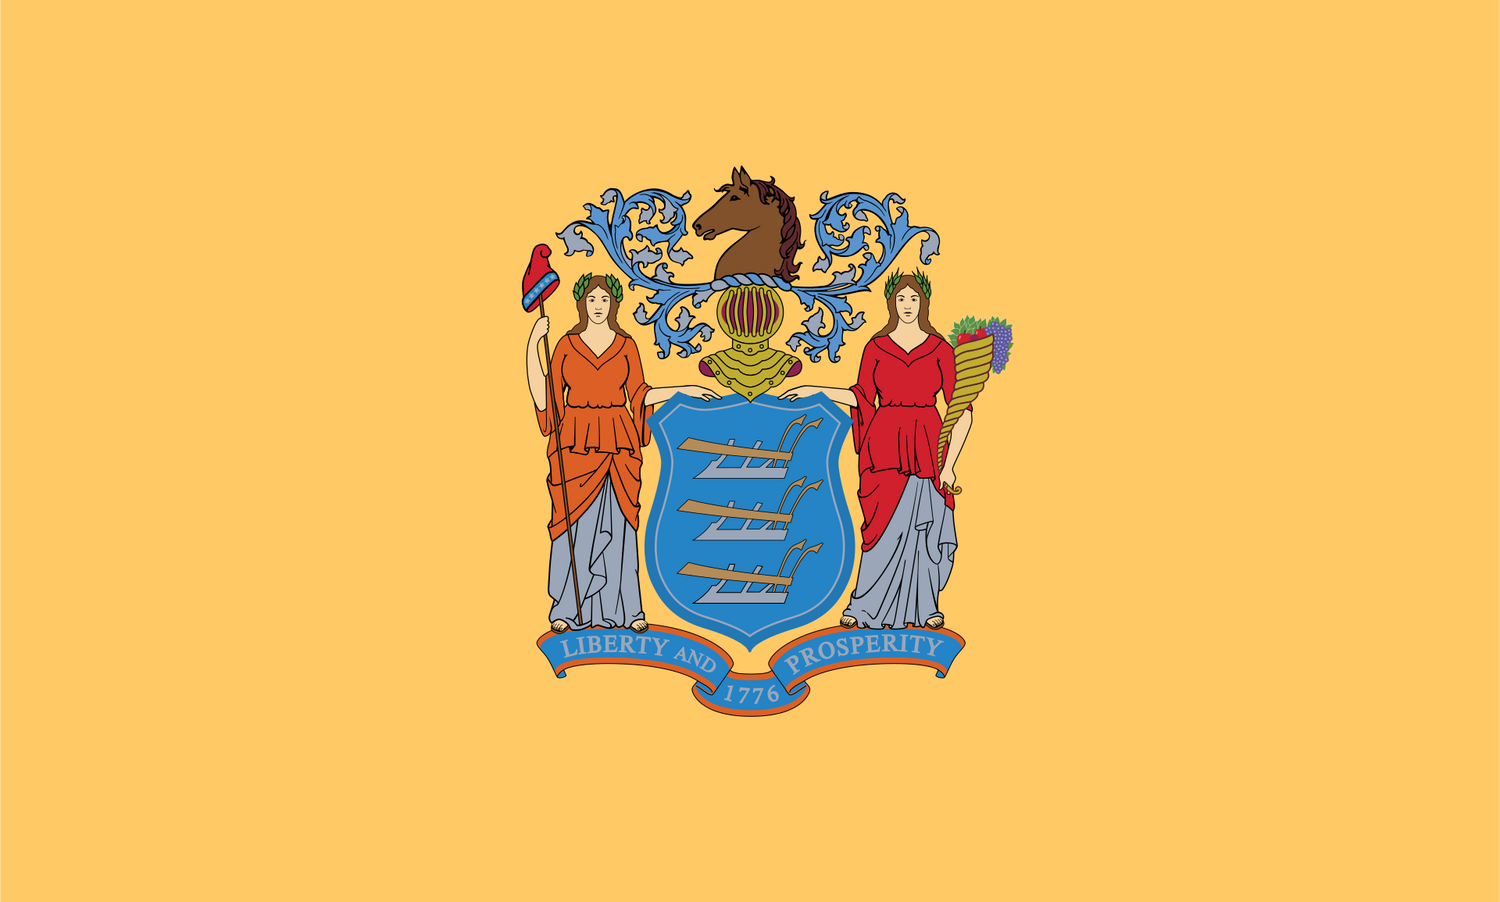 The official state flag of New Jersey was adopted in 1896 and features the coat of arms of the state on a buff-colored background. - History By Mail